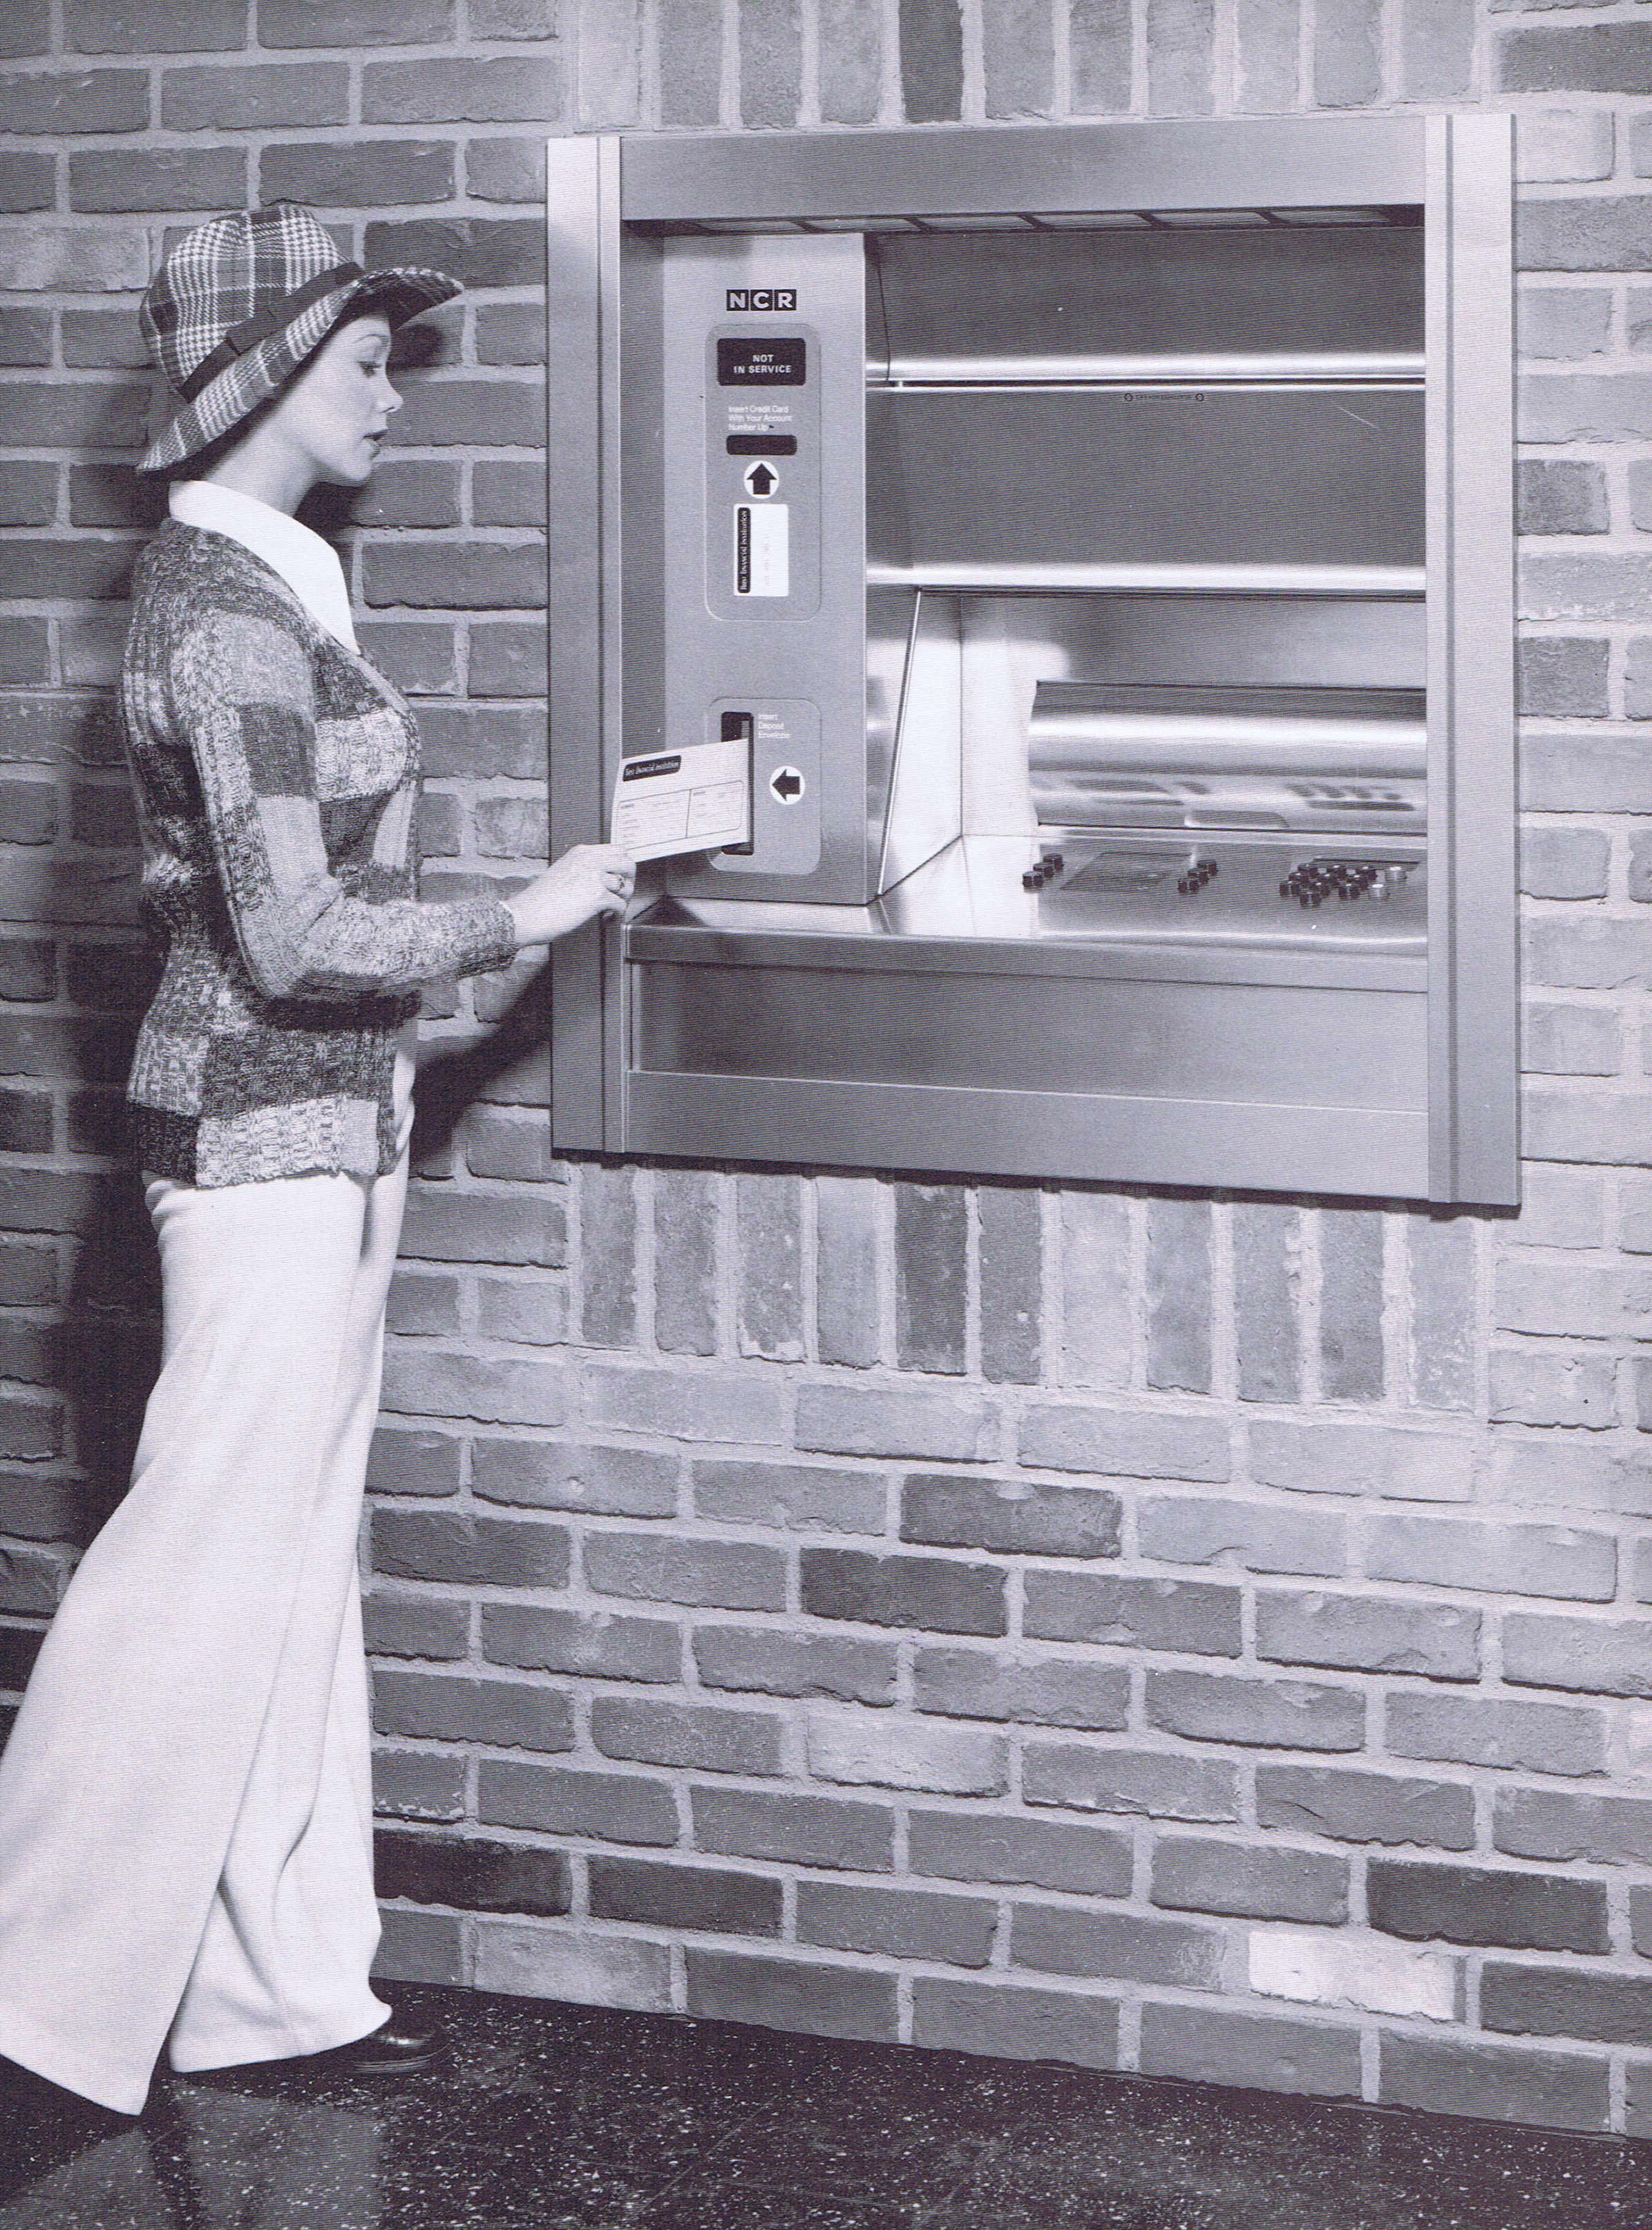 atm ncr history innovation machine teller automated 1967 very come installed